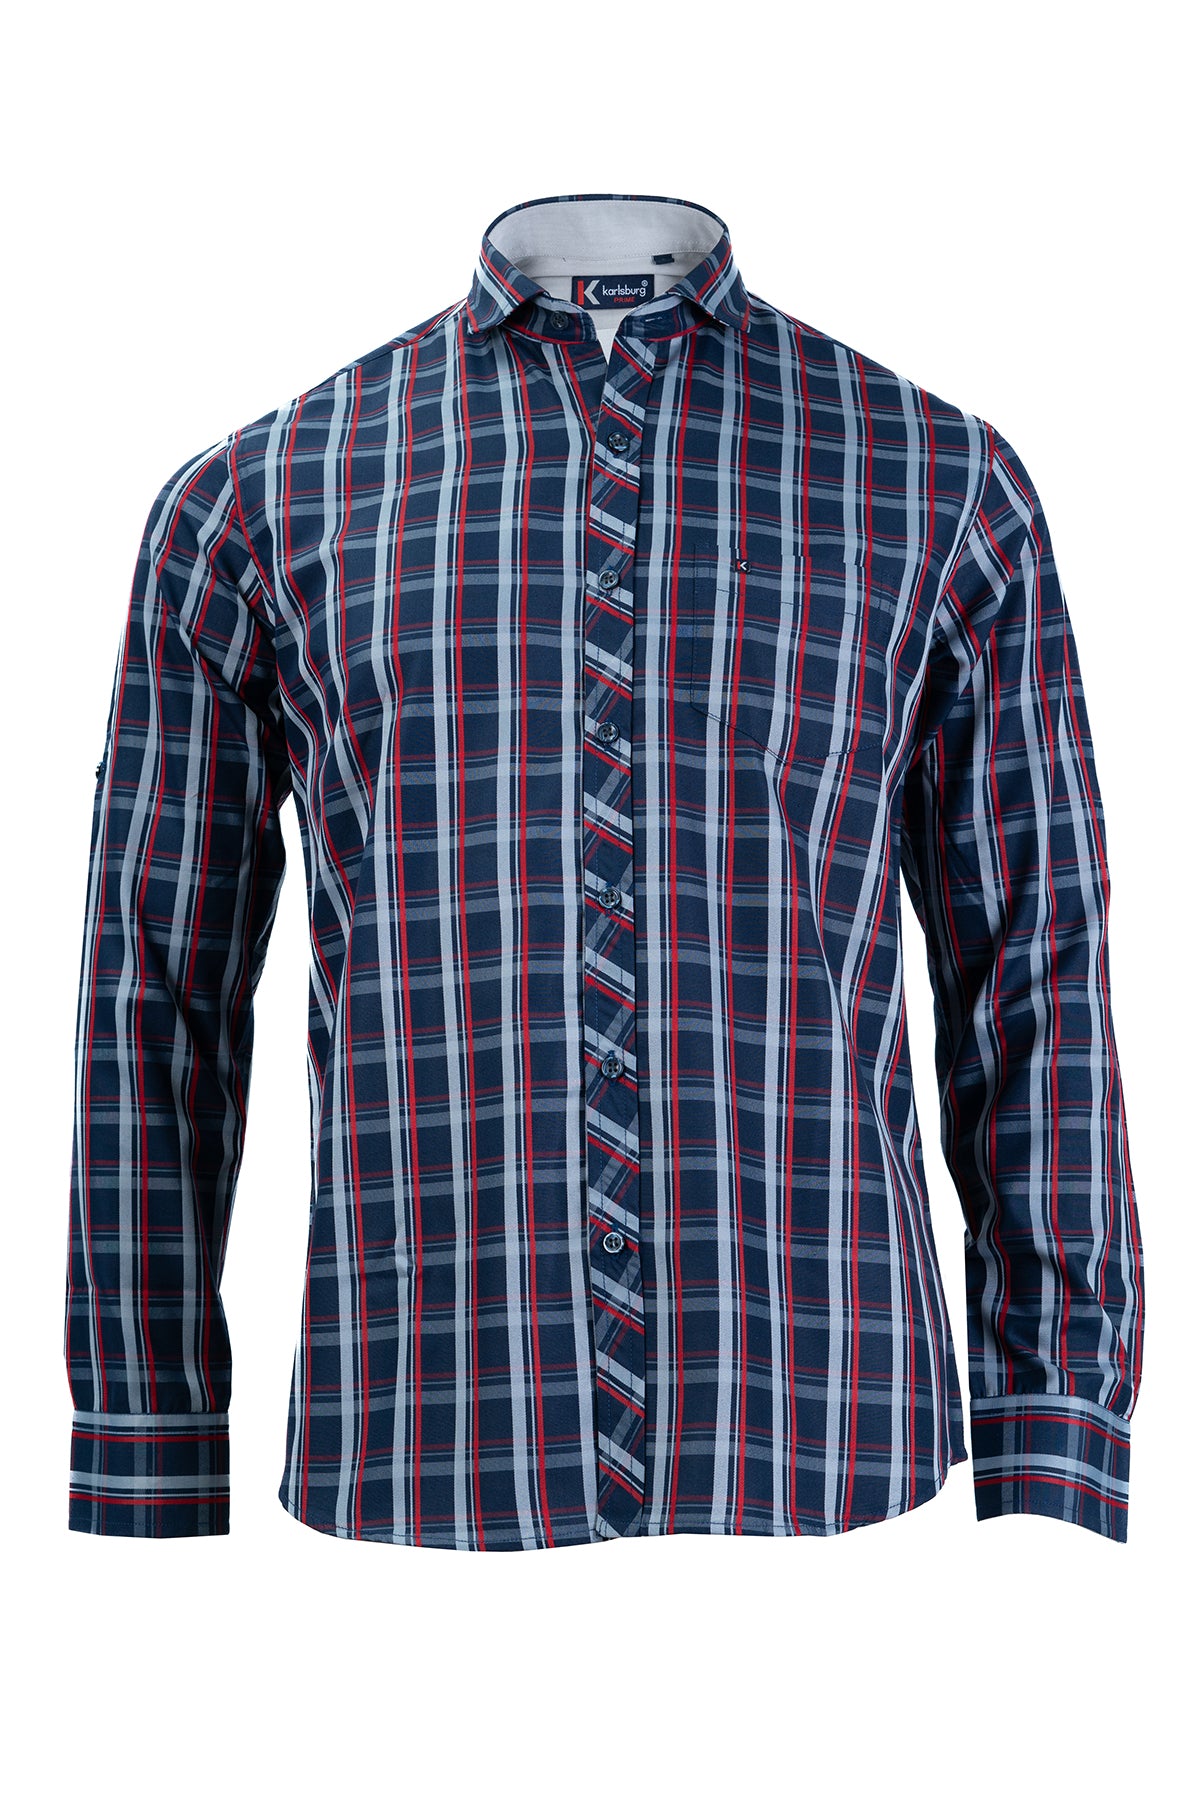 Men's Blue Red Checked Shirt